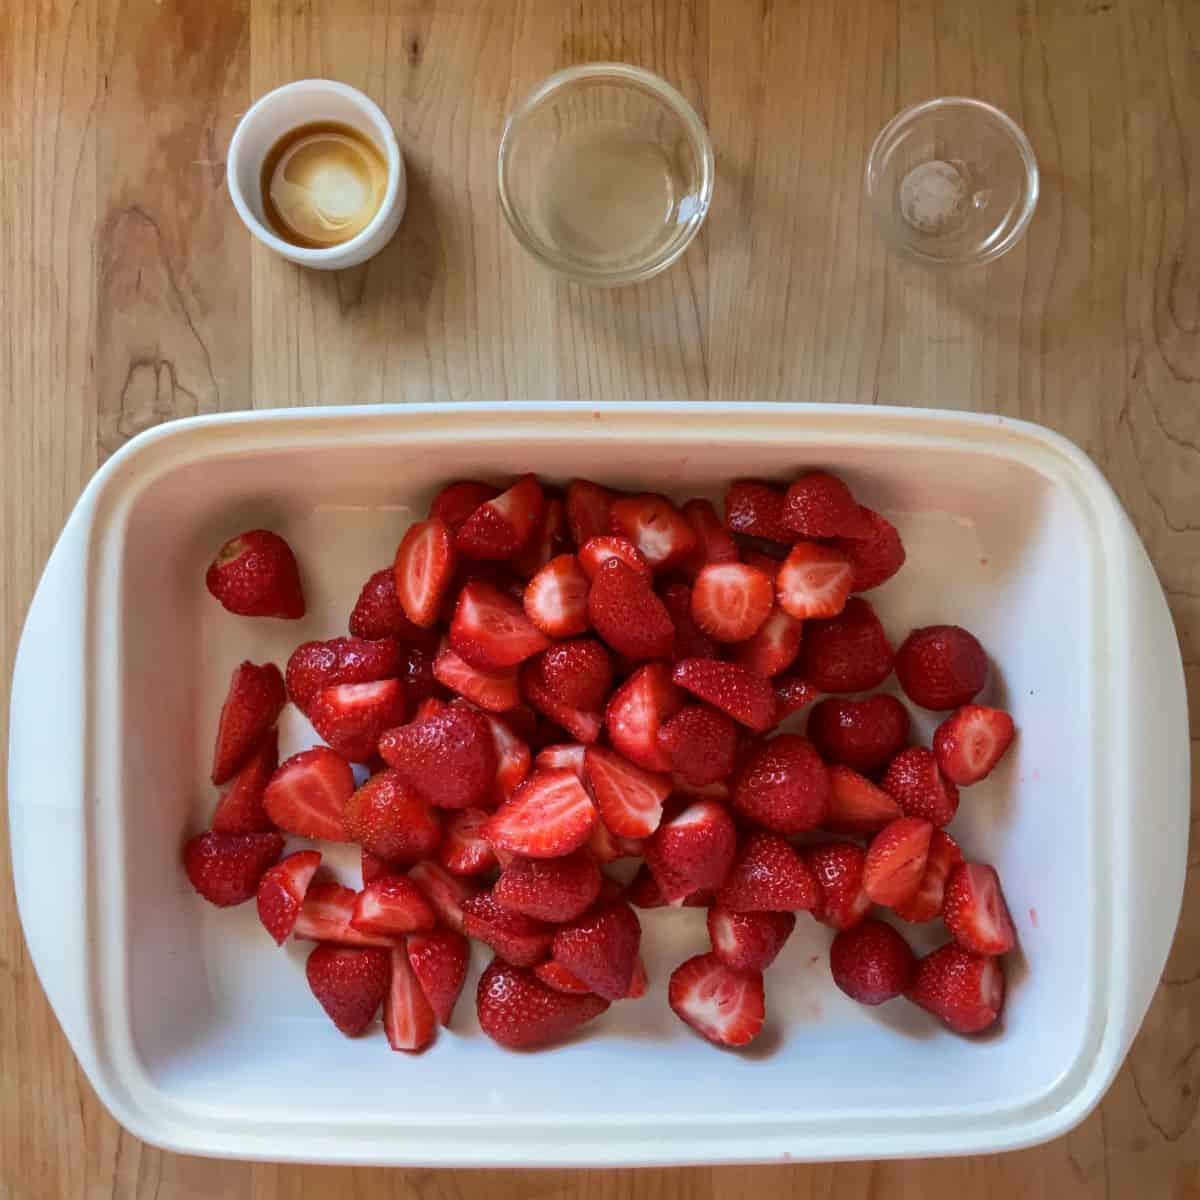 Hulled and halved strawberries in a white baking dish.